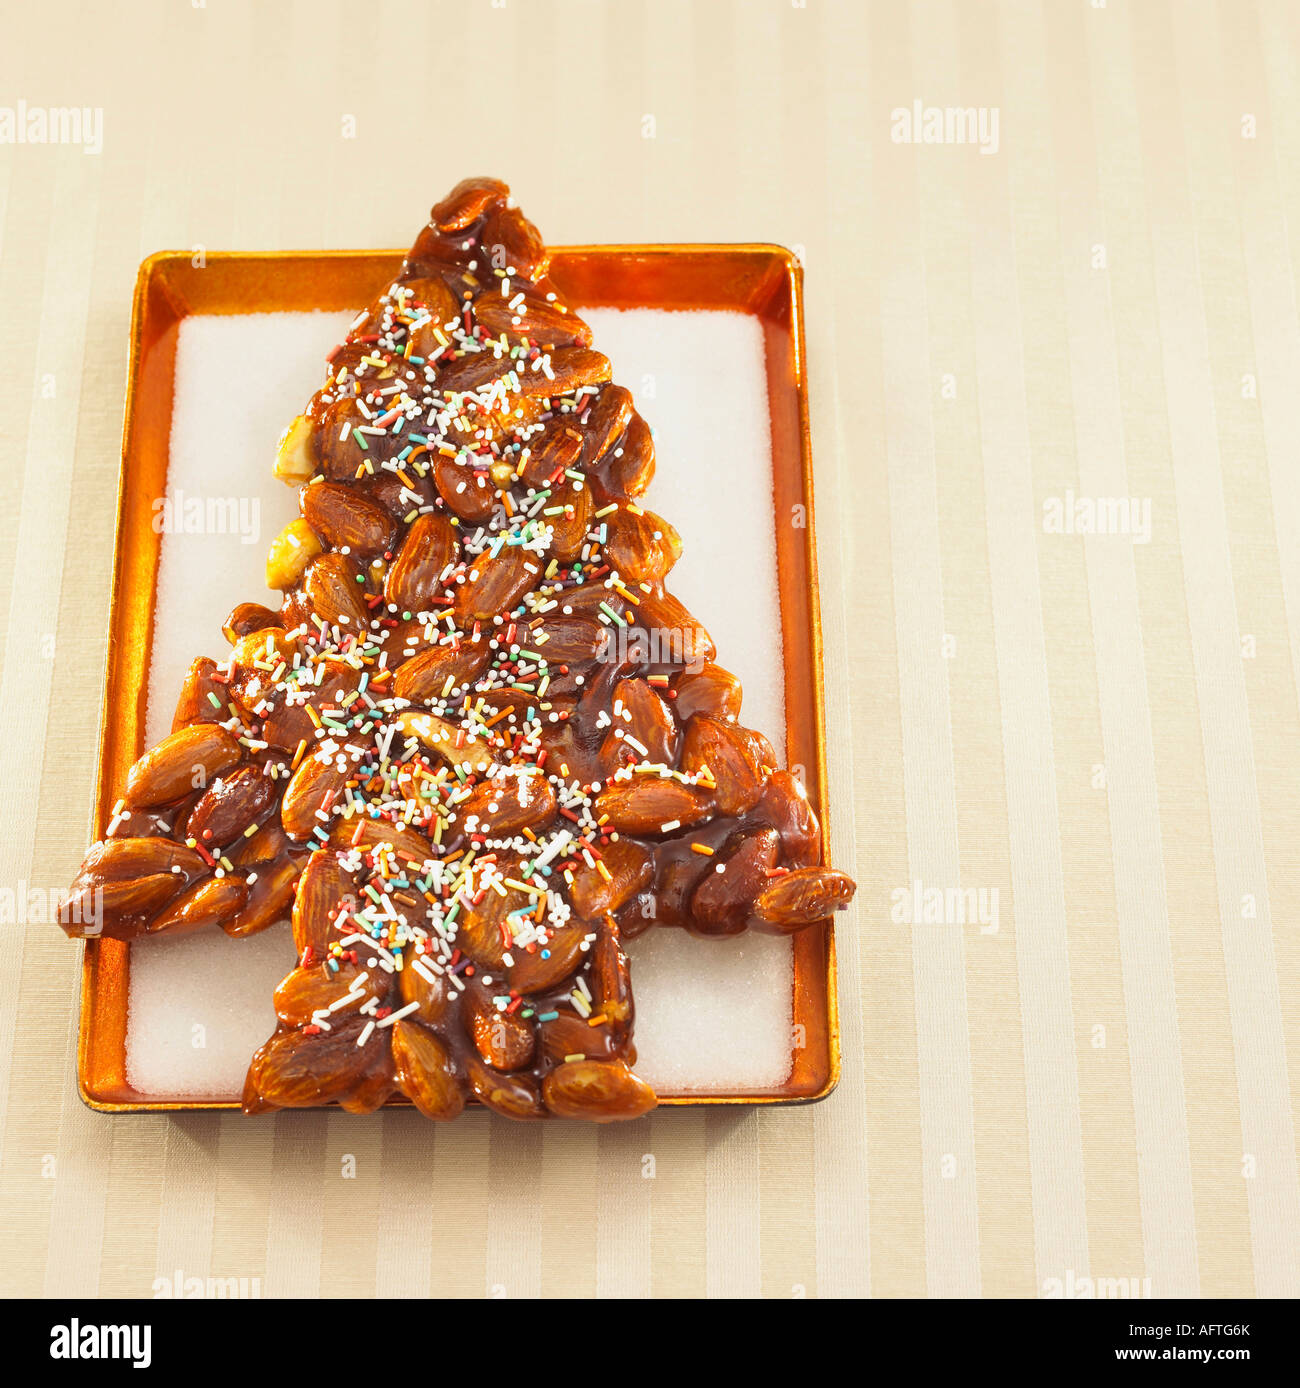 Christmas-tree-shaped almond cookie on tray, Close-up Stock Photo